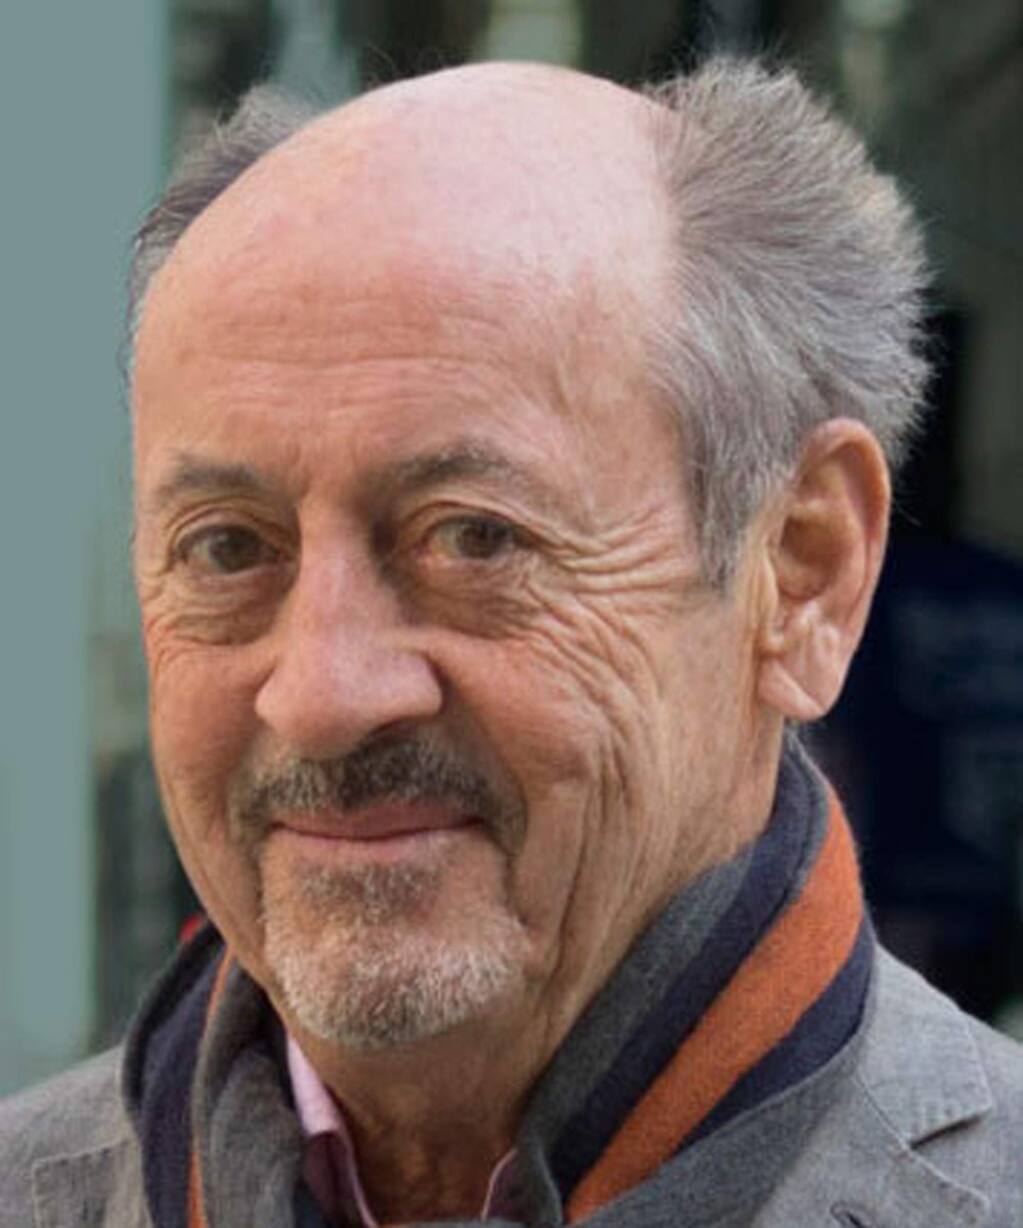 Former US poet laureate Billy Collins returns to the Sonoma Valley Authors Festival, May 3-5, in Sonoma. (SONOMA VALLEY AUTHORS FESTIVAL)